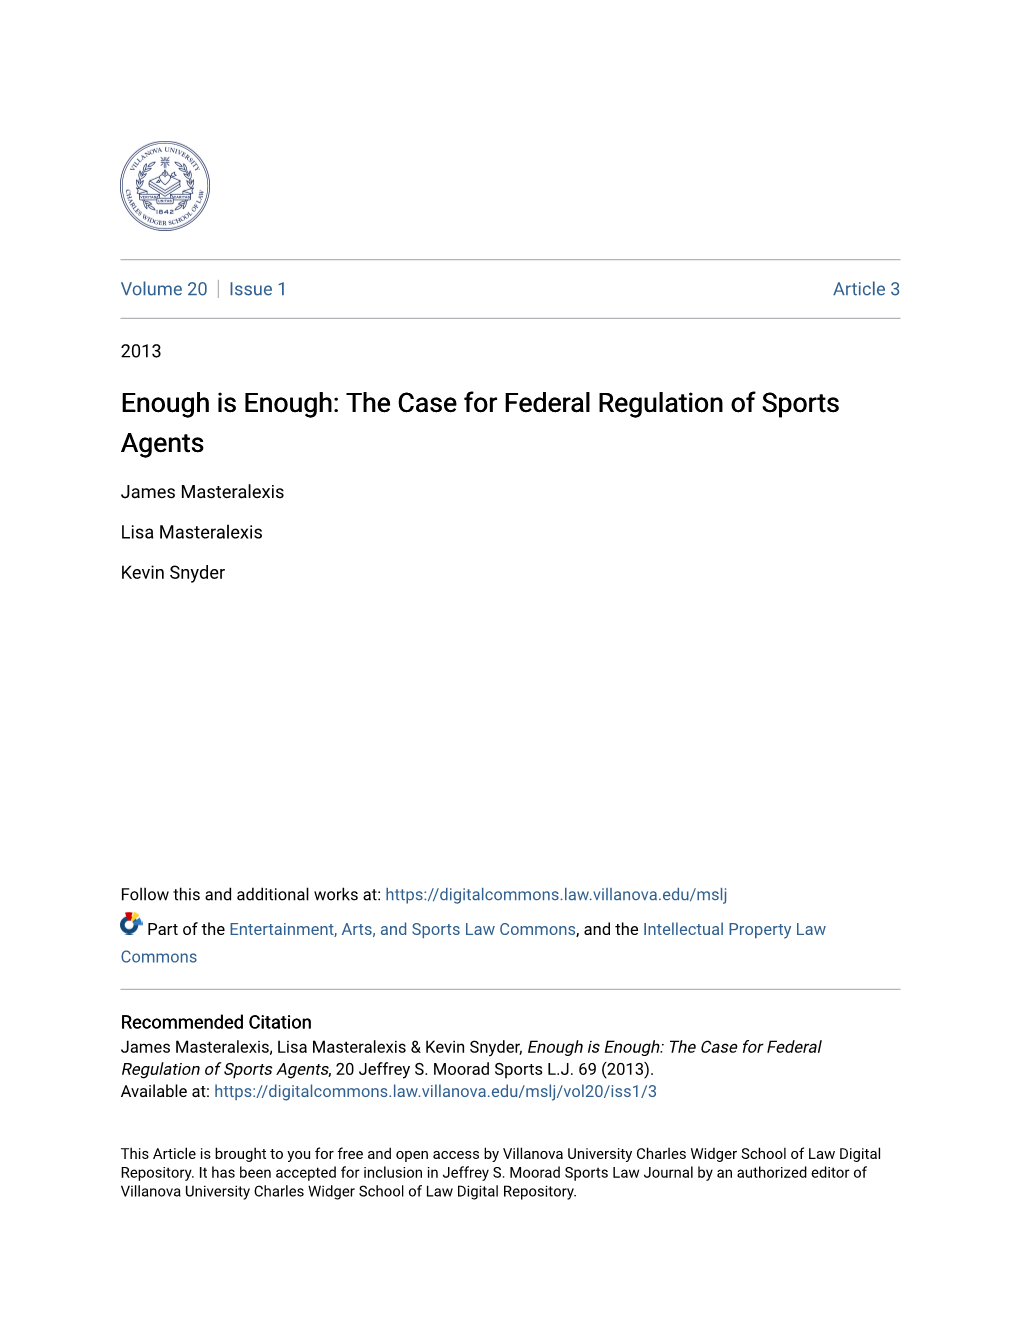 The Case for Federal Regulation of Sports Agents